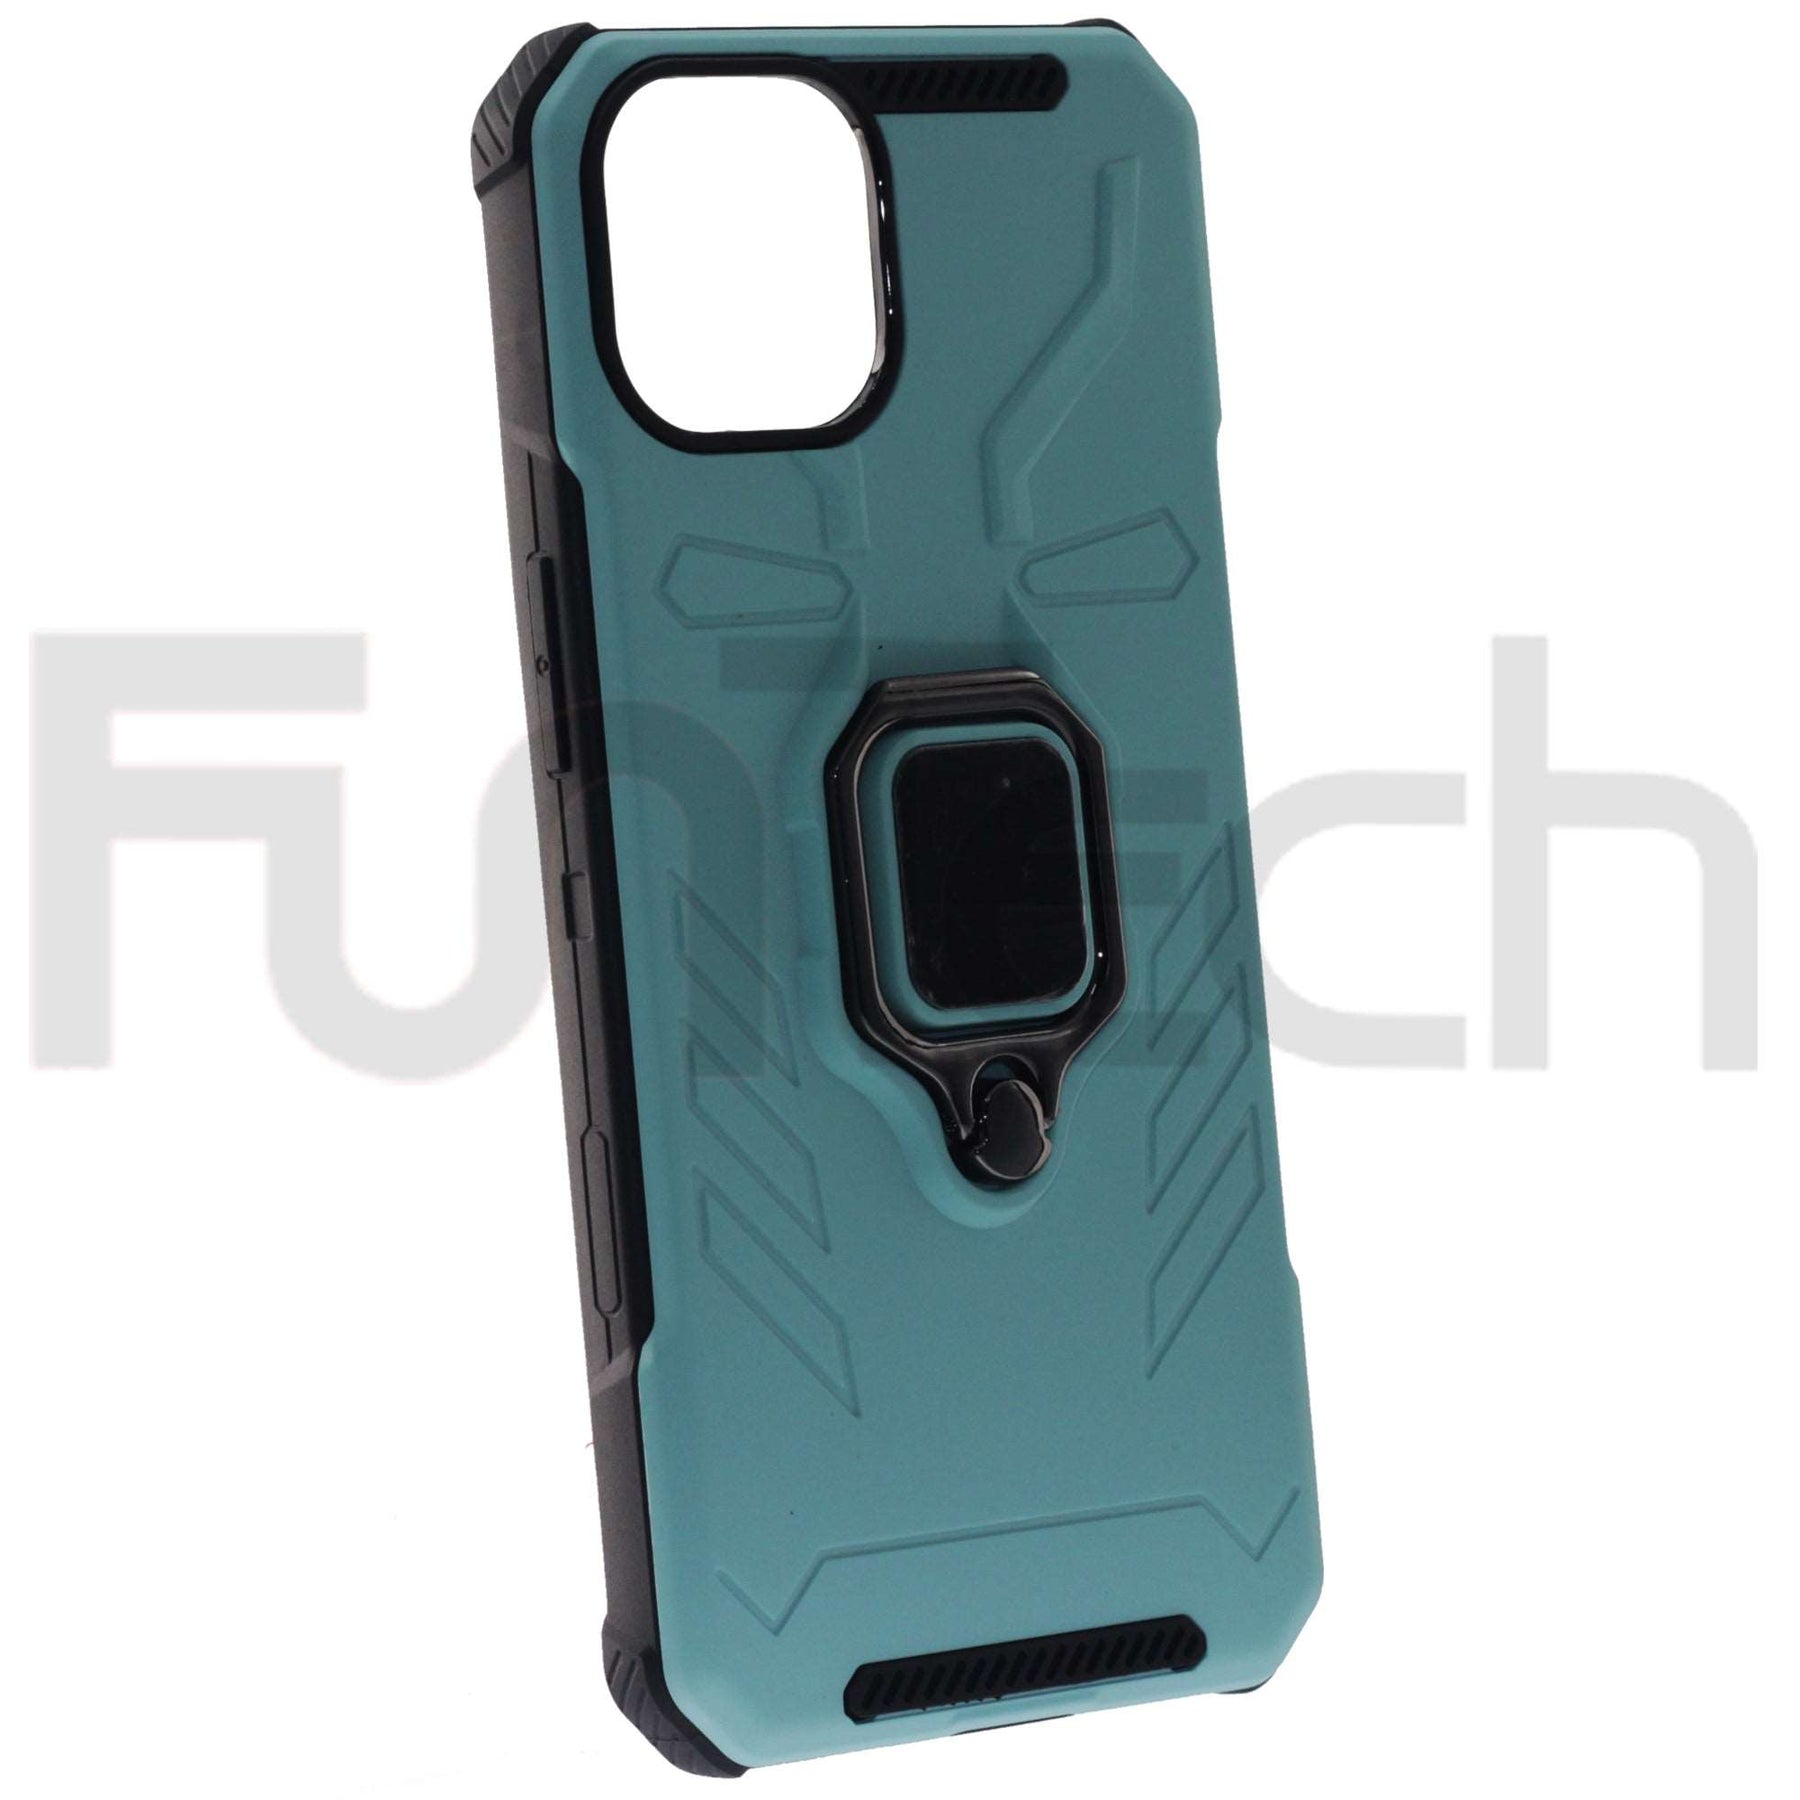 Apple iPhone 13, Armor Case, Color Teal.